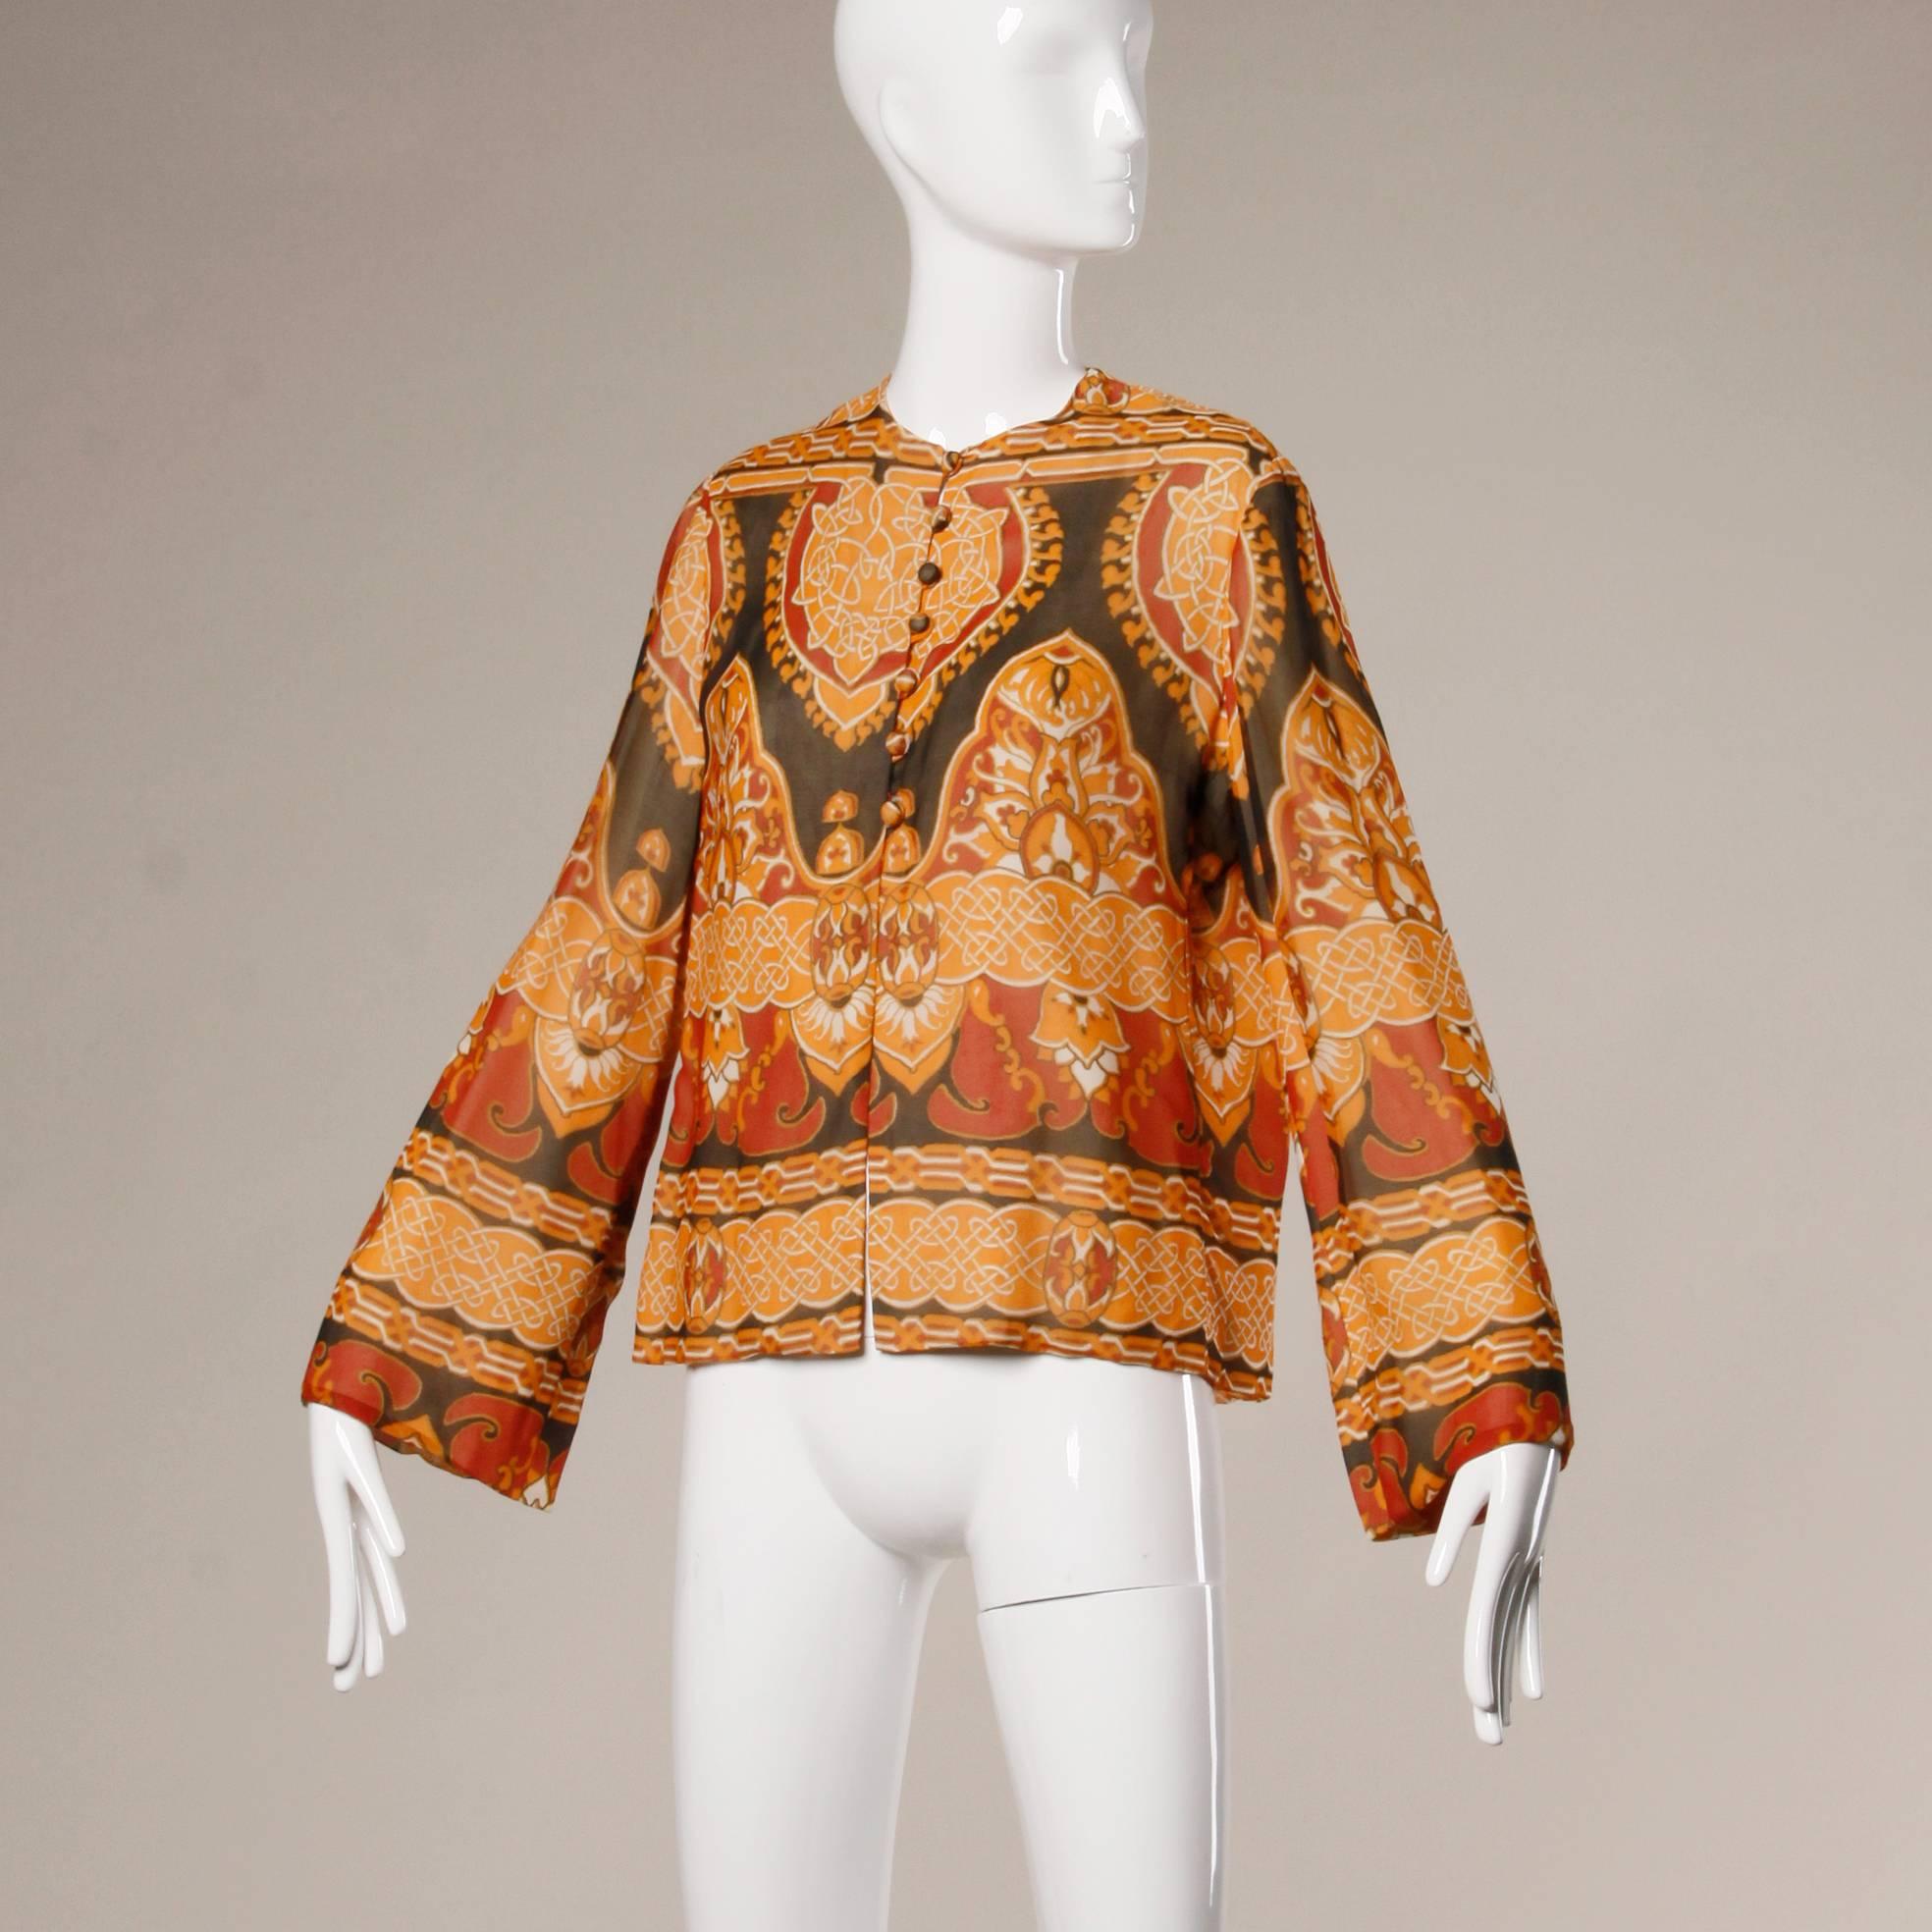 Vintage Geoffrey Beene
Circa 1960s
Art Nouveau Printed Silk
Bell Sleeves
Fully Lined in Silk
Front Covered
Button Closure
Marked Size: Not Marked
Estimated Size: Medium
Color: Orange/ Gray/ Burgundy/ Beige
Fabric: Silk
Label: Geoffrey